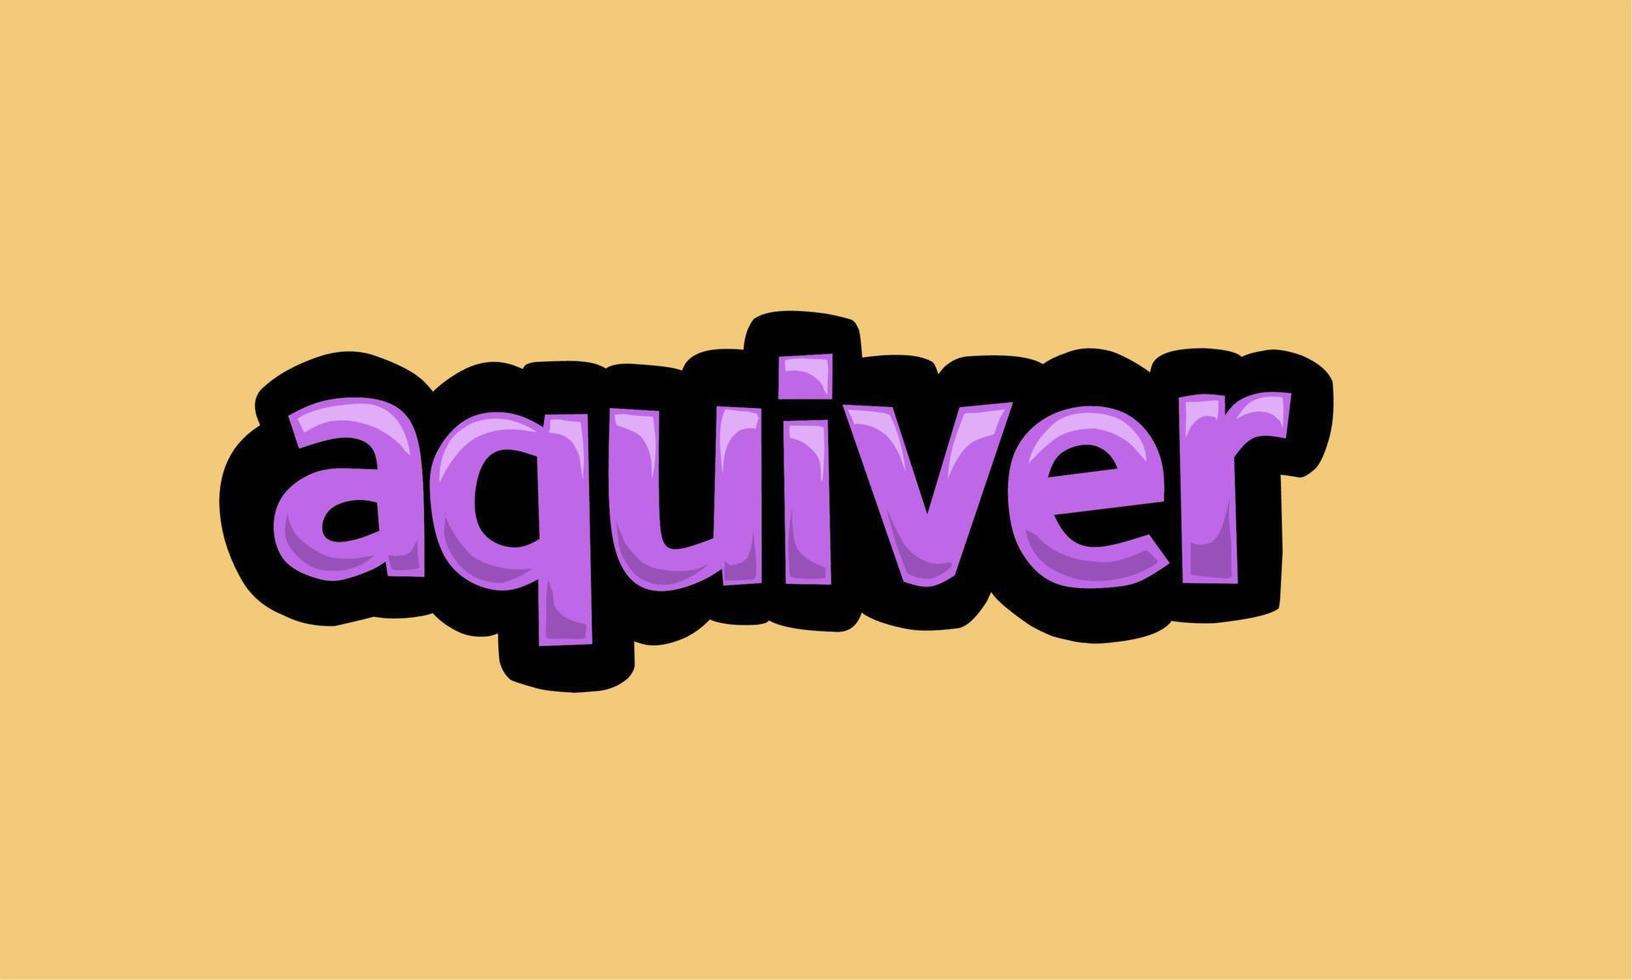 AQUIVER writing vector design on a yellow background